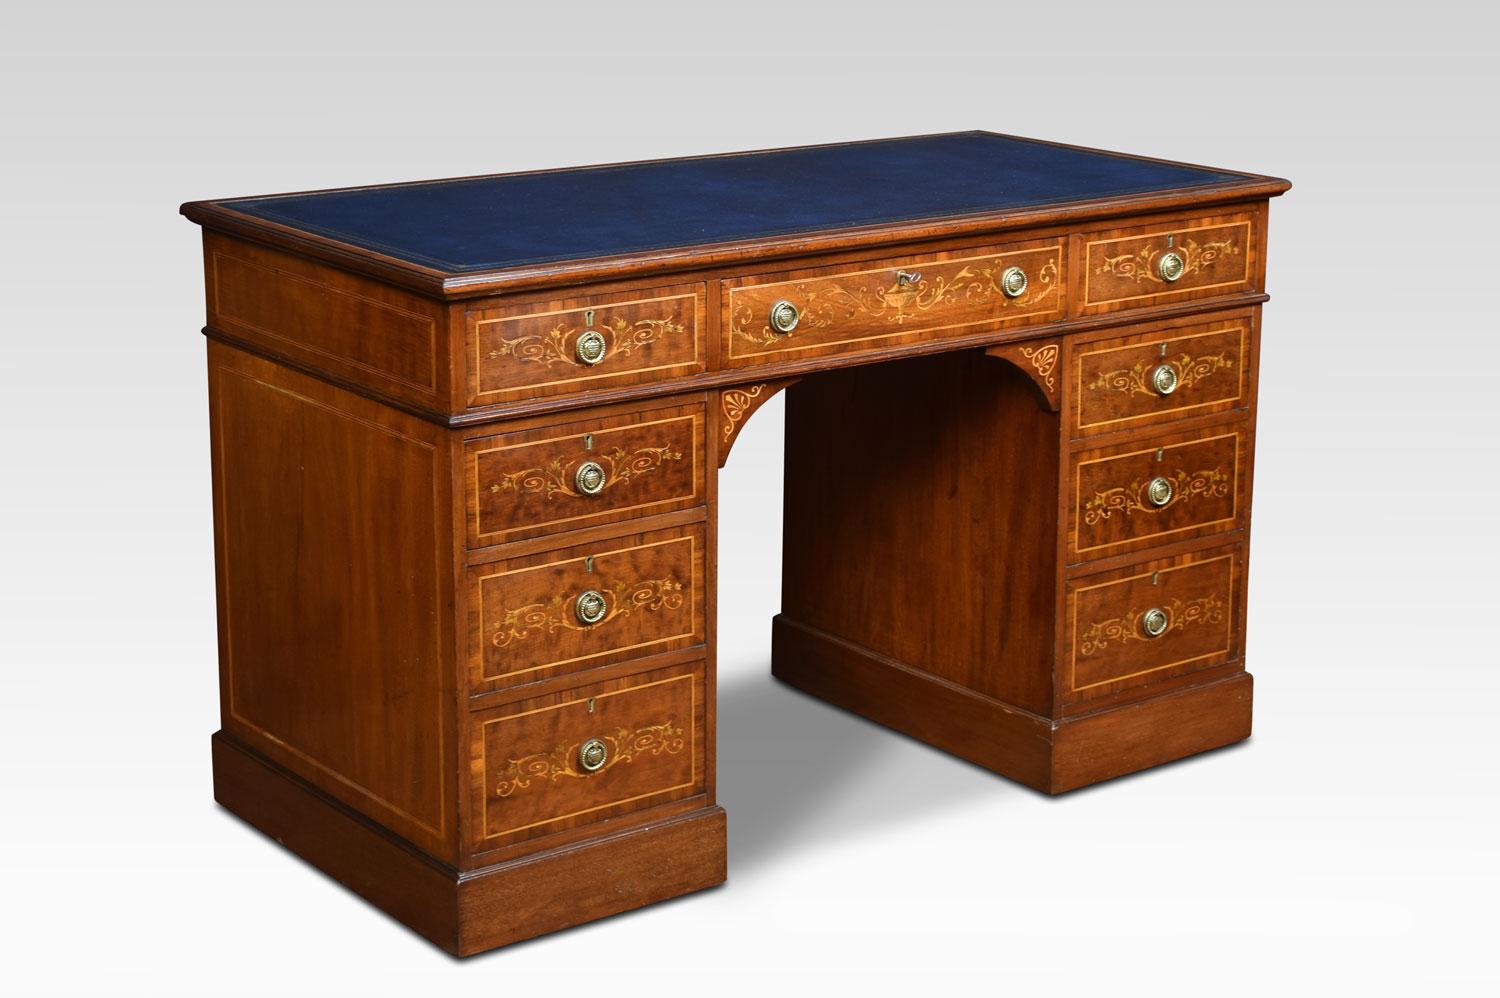 Mahogany inlaid pedestal desk, with blue gilt tooled leather. Over an arrangement of nine drawers, with classical urn and acanthus scrolling inlay. All raised up on plinth base terminating in brass castors.
Dimensions:
Height 30.5 inches height of